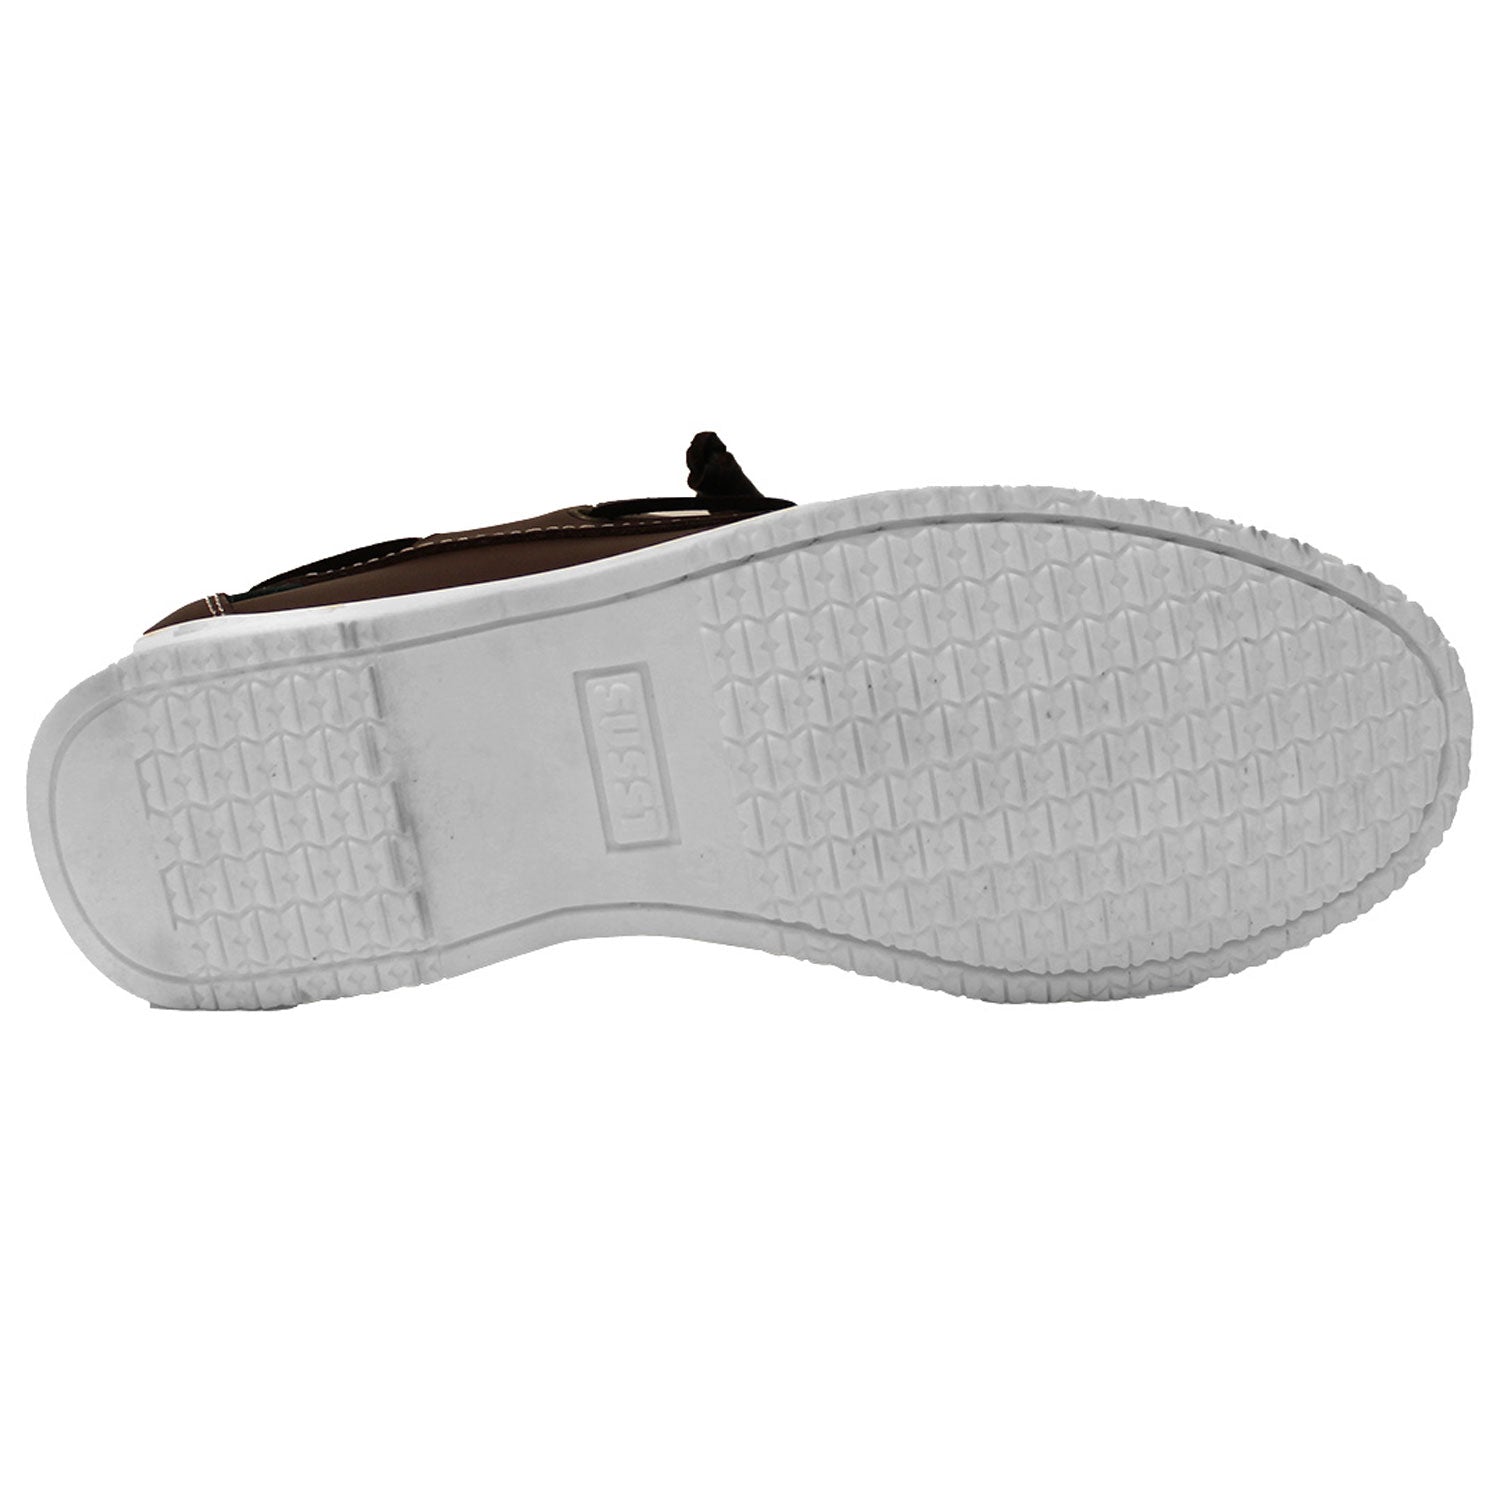 Susst Gaby Deck Shoe - Brown 2 Shaws Department Stores